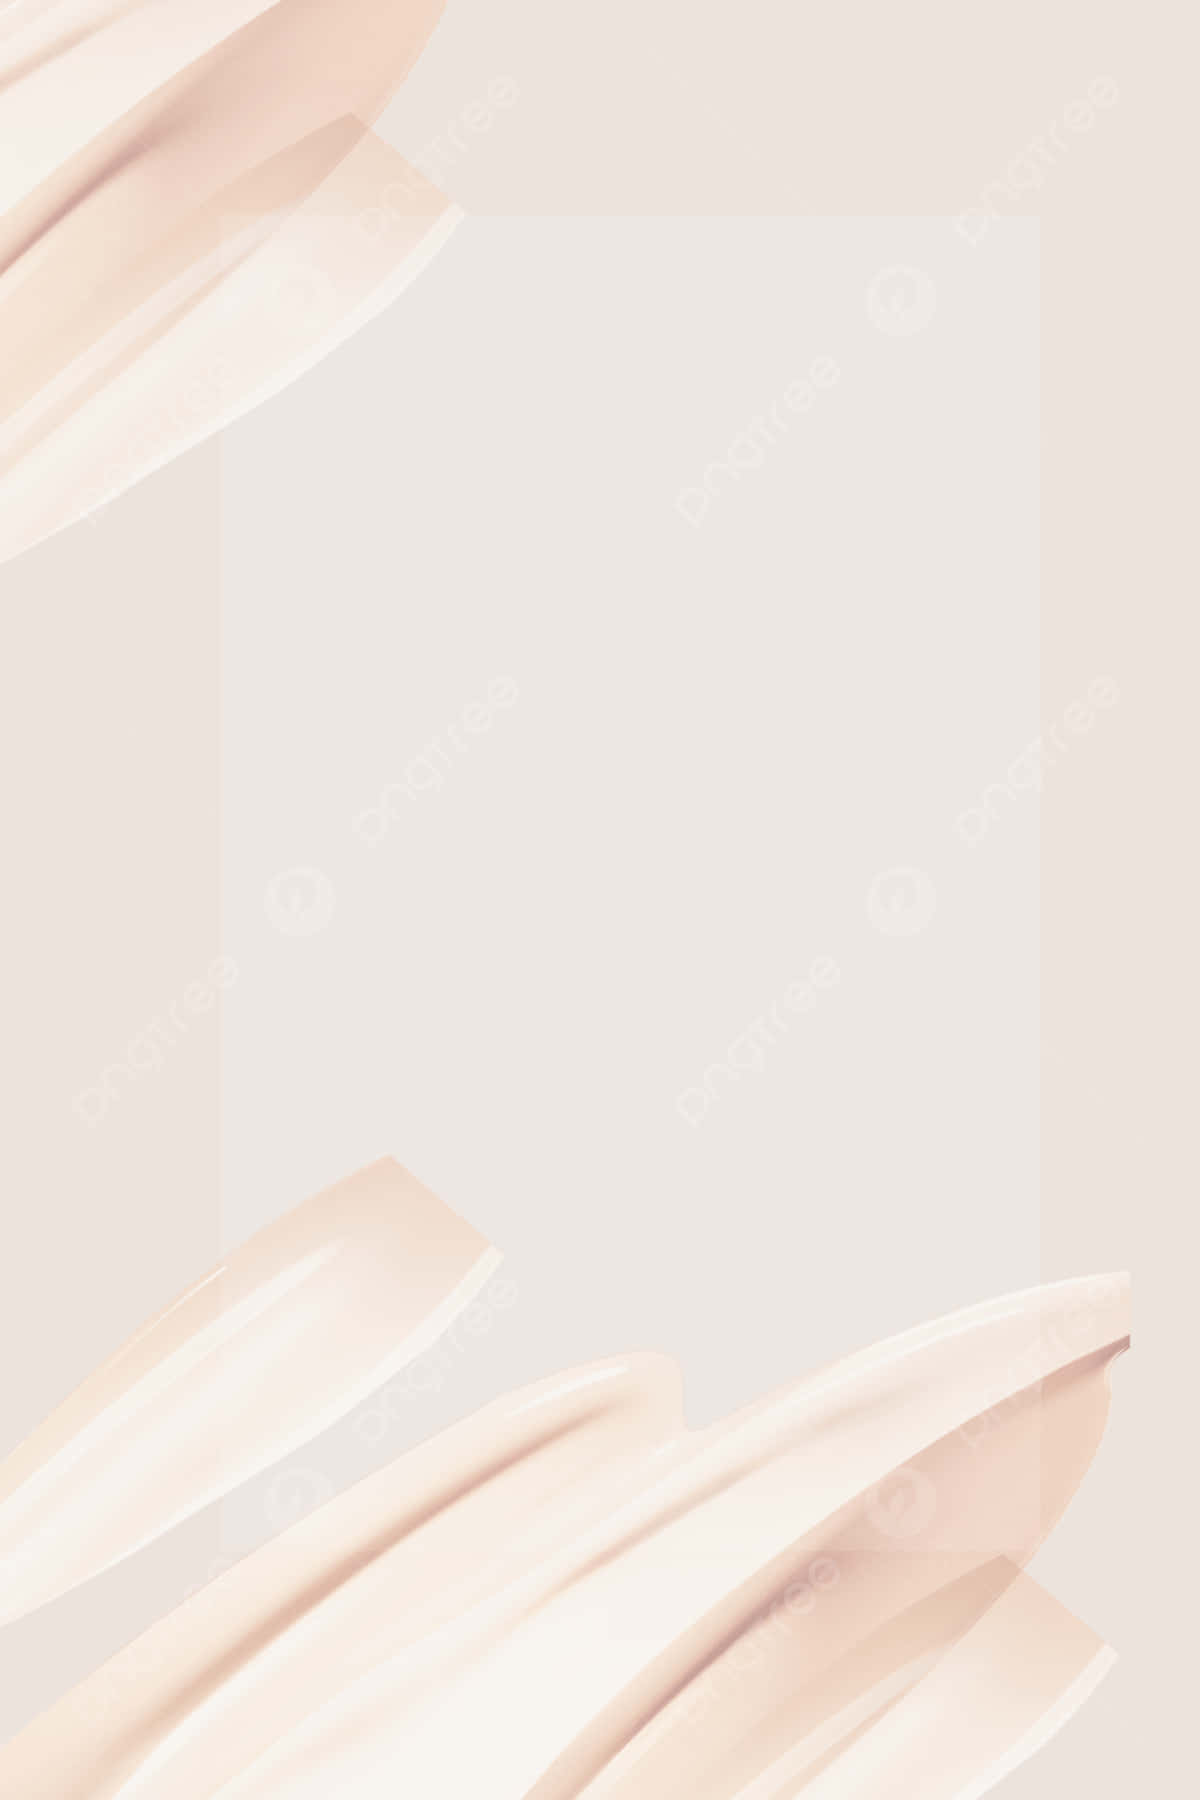 Neutral Makeup Swatches Background Wallpaper